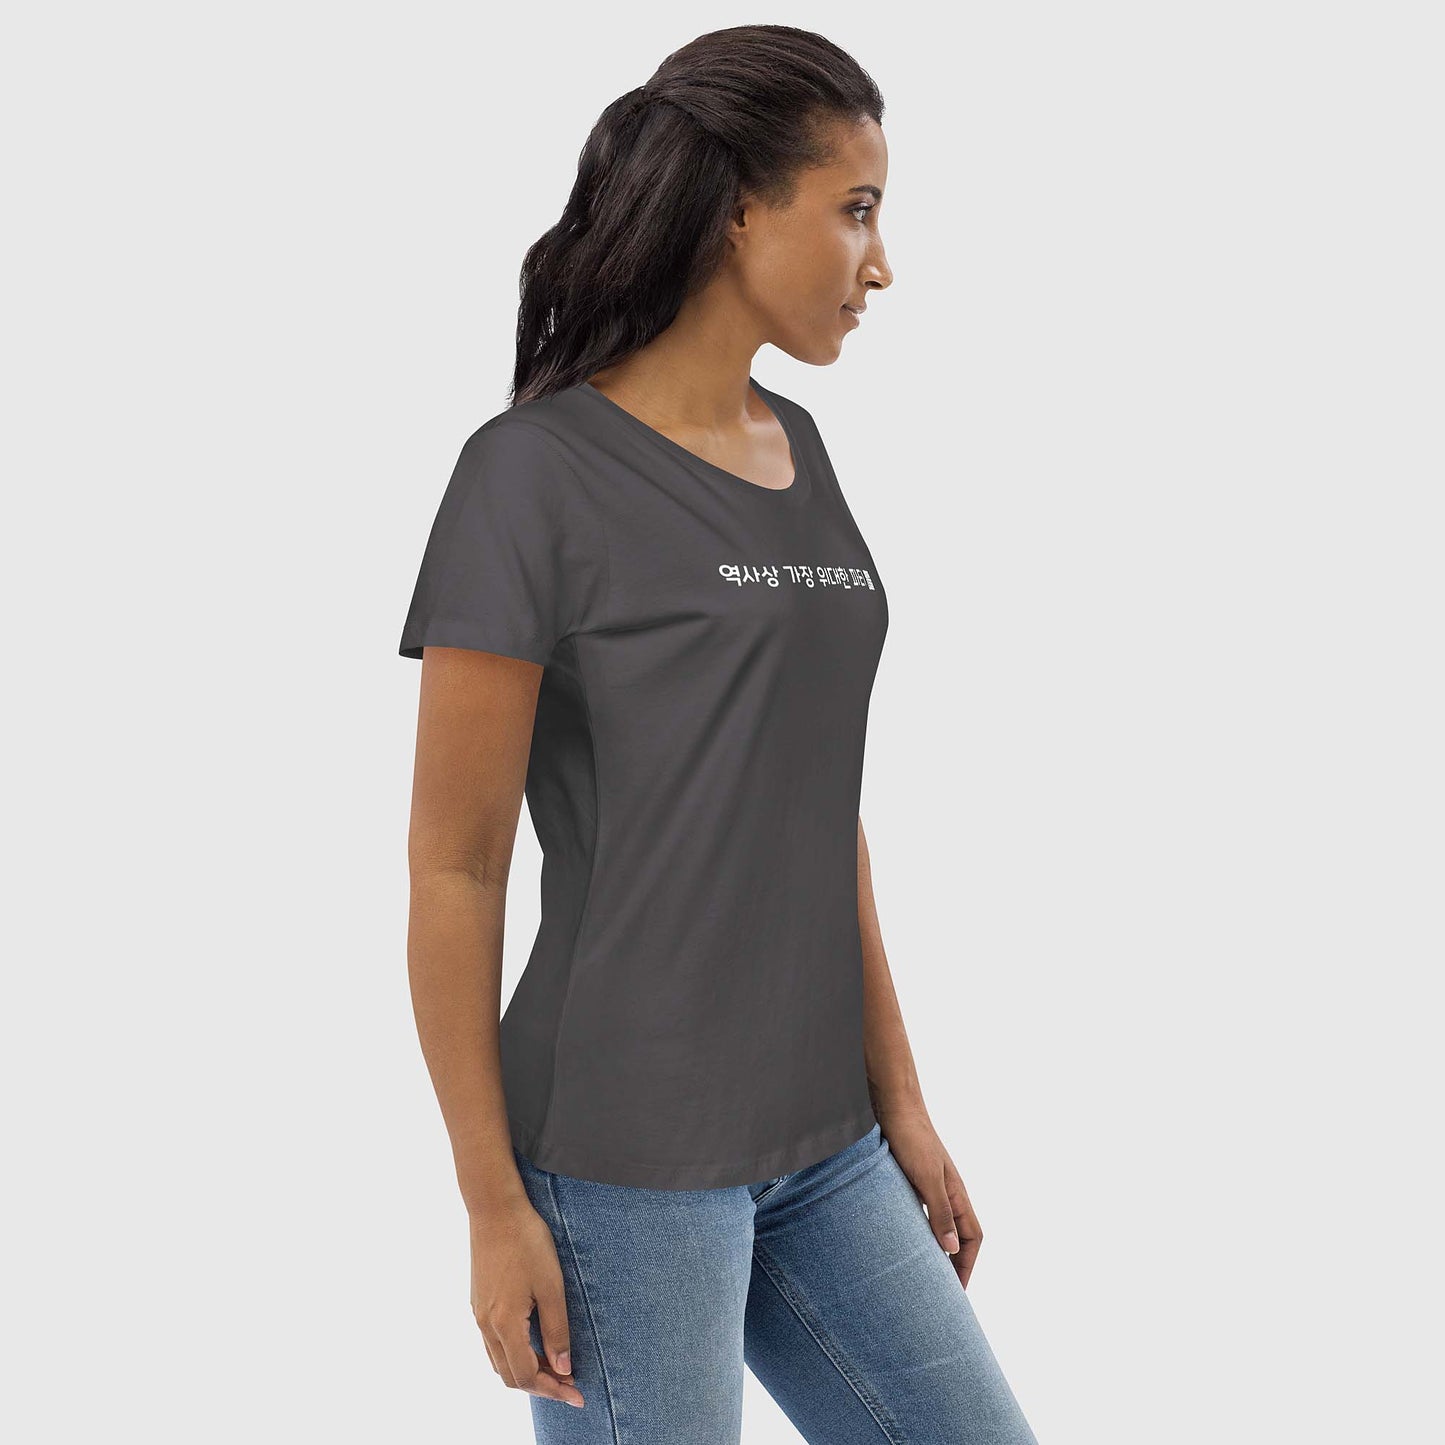 Women's anthracite fitted organic cotton t-shirt with Korean 2269 party message